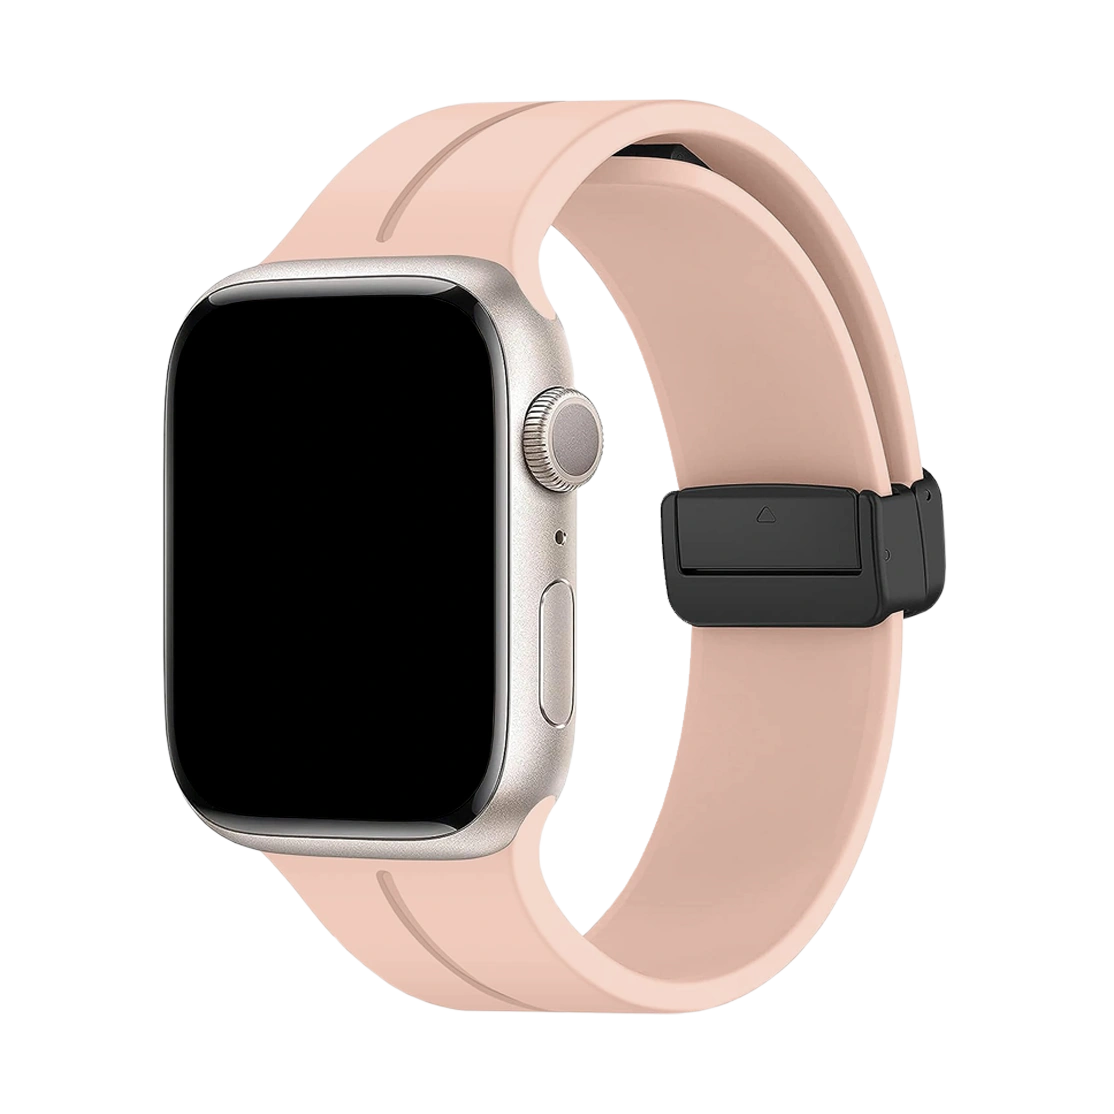 Unipha Apple Watch Silicone Band Magnetic D-Buckle Strap Stylish Creative